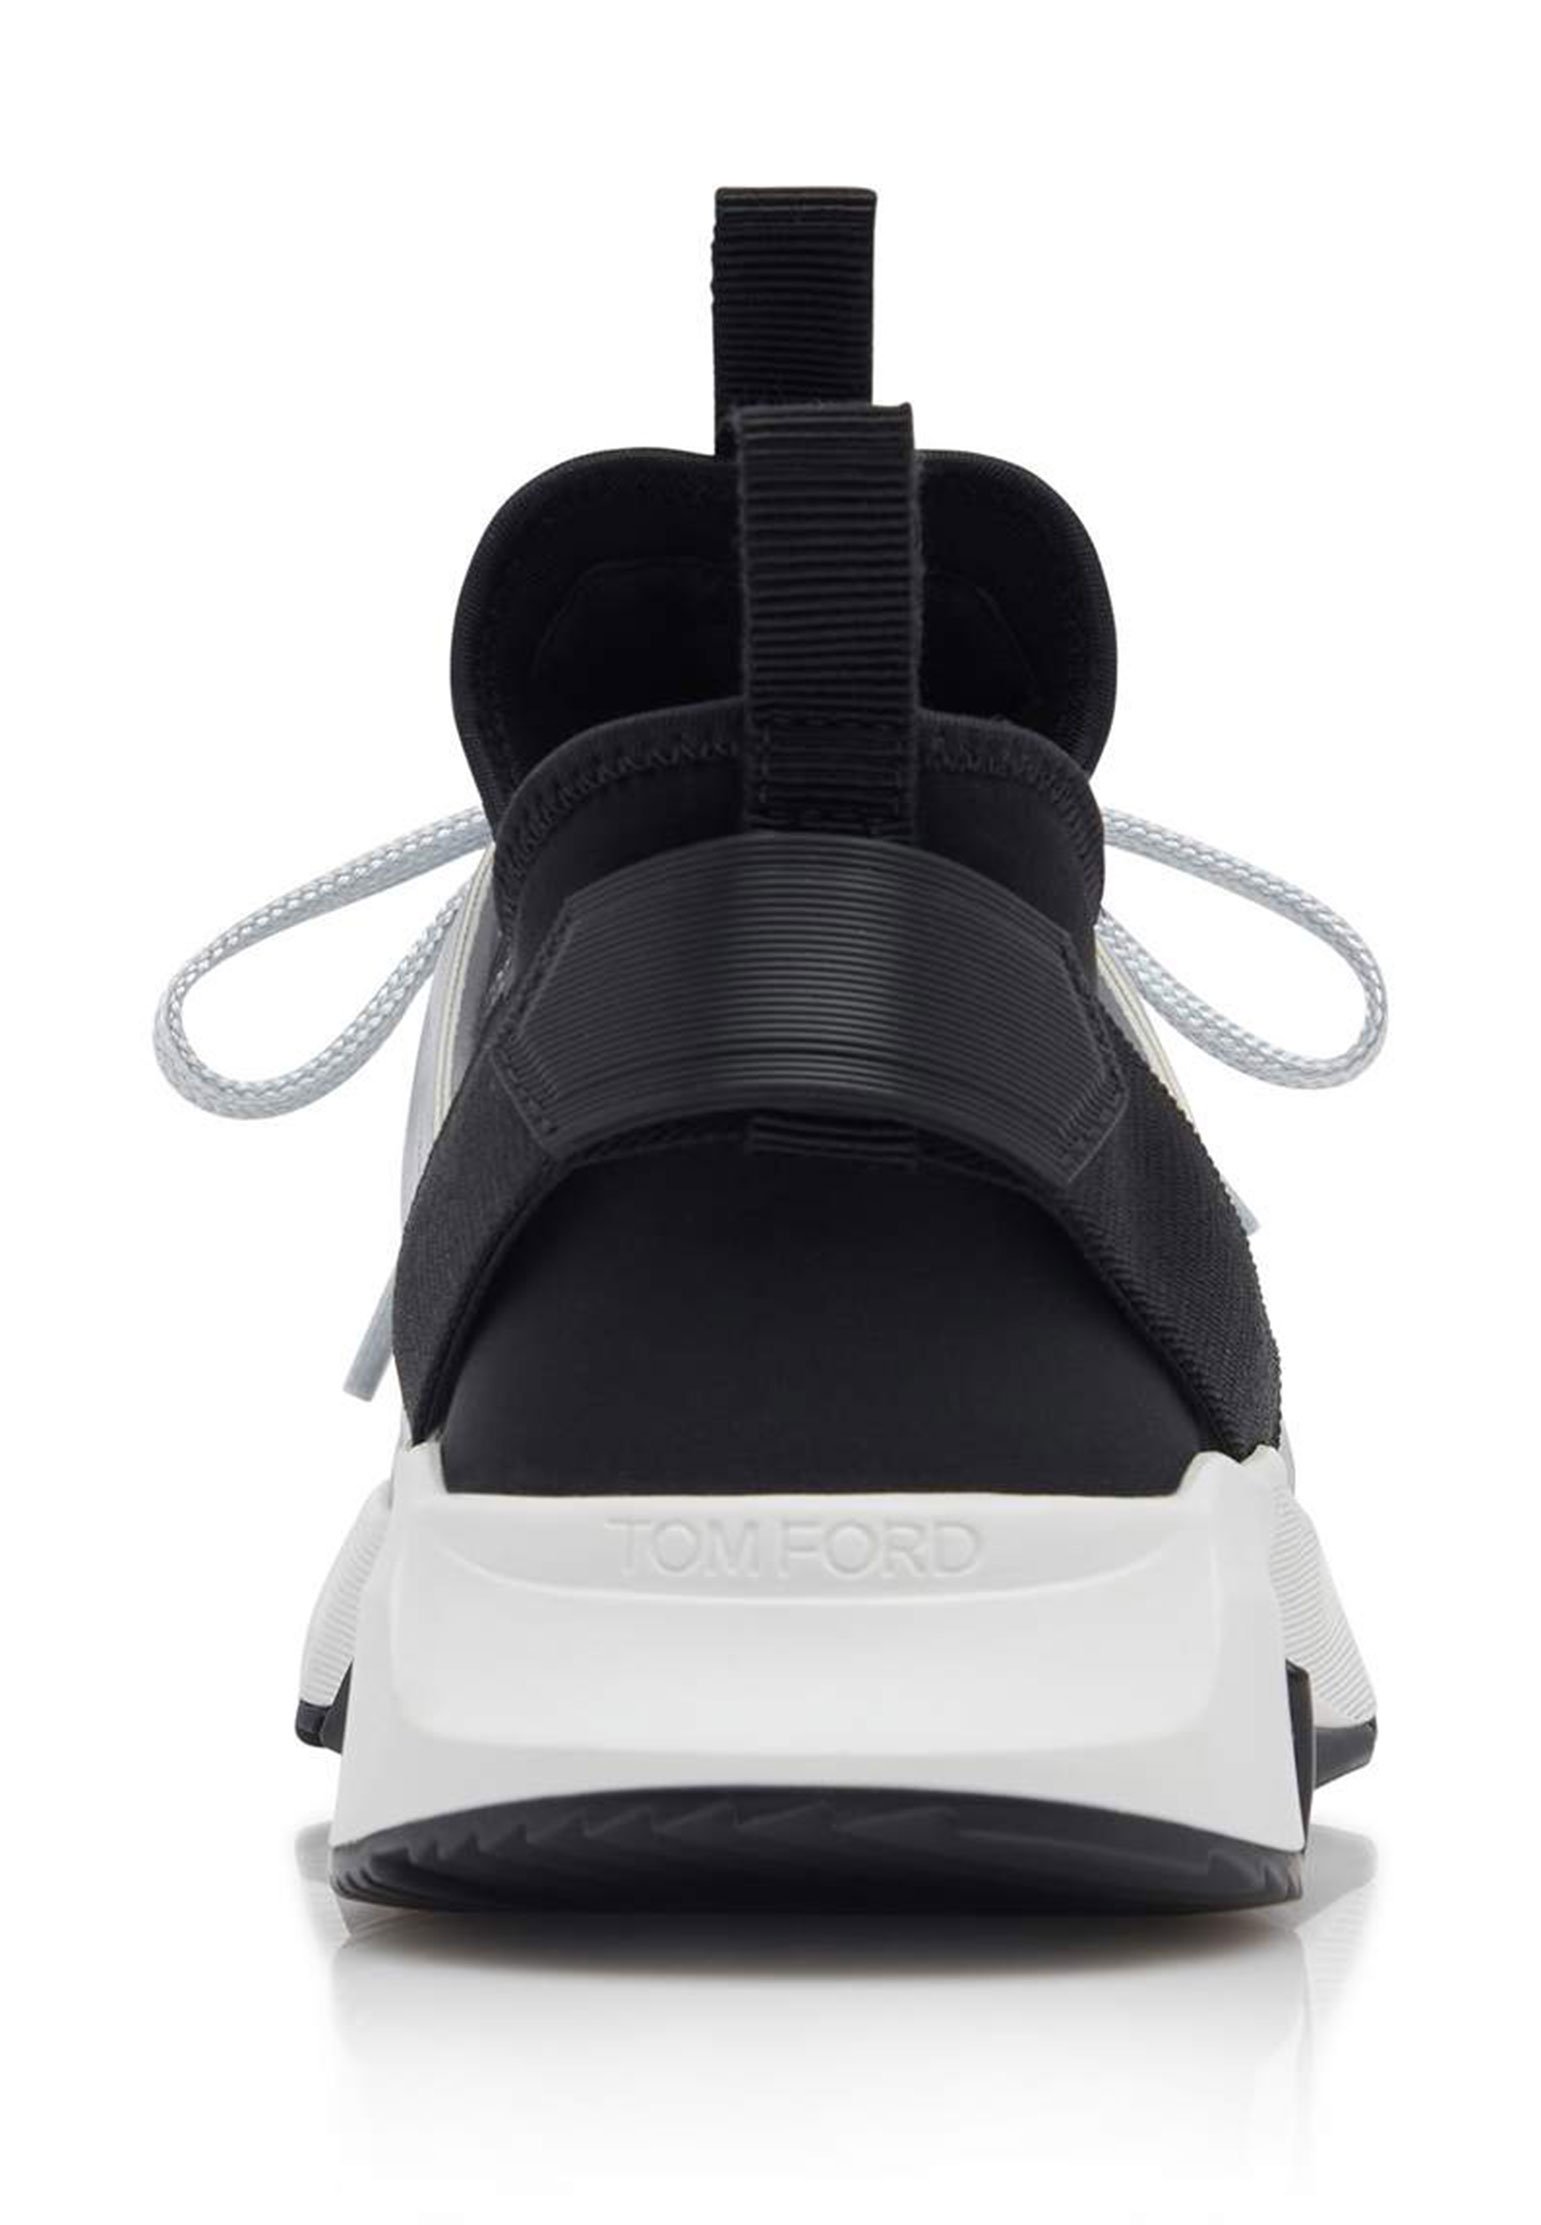 Sneakers TOM FORD Color: multicolor (Code: 201) in online store Allure